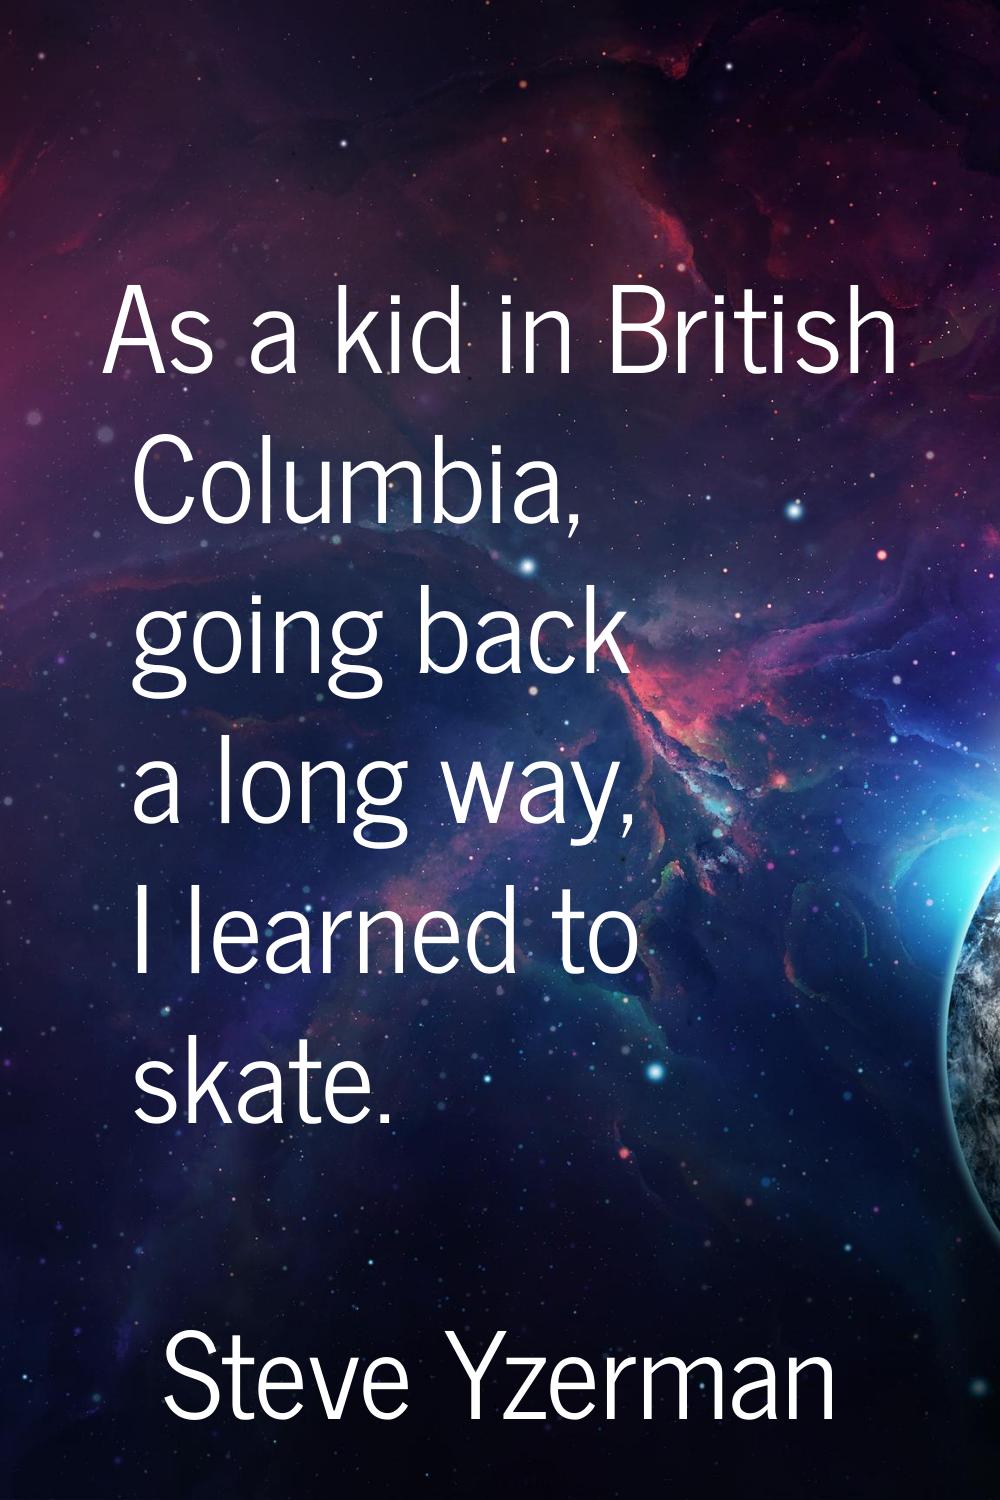 As a kid in British Columbia, going back a long way, I learned to skate.